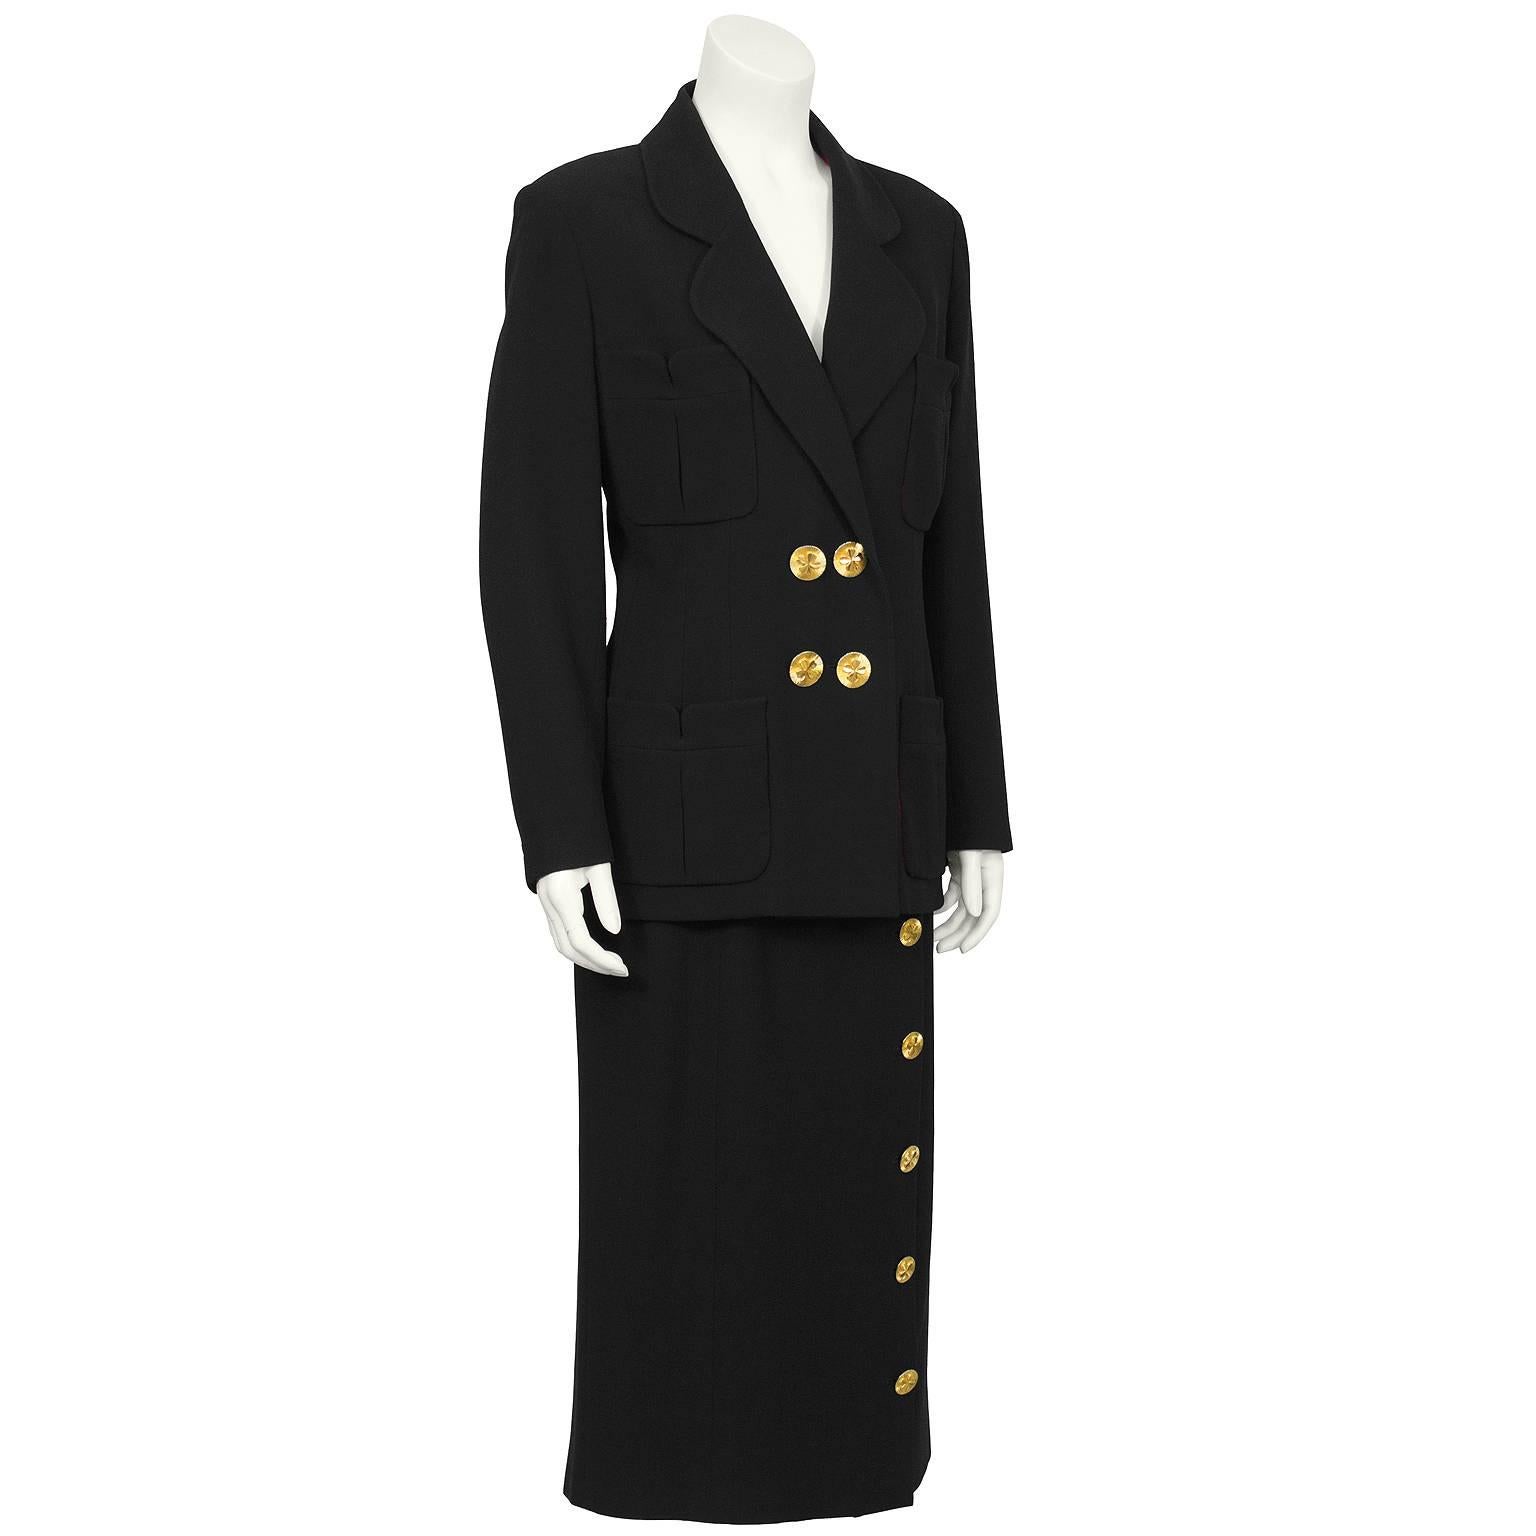 The ultimate 1980's Chanel black maxi suit. The jacket has a curved notched lapel with similar curved details on the pockets and fastens double-breasted at the front with oversized gold-toned cloverleaf buttons. Matching buttons on the cuffs. The